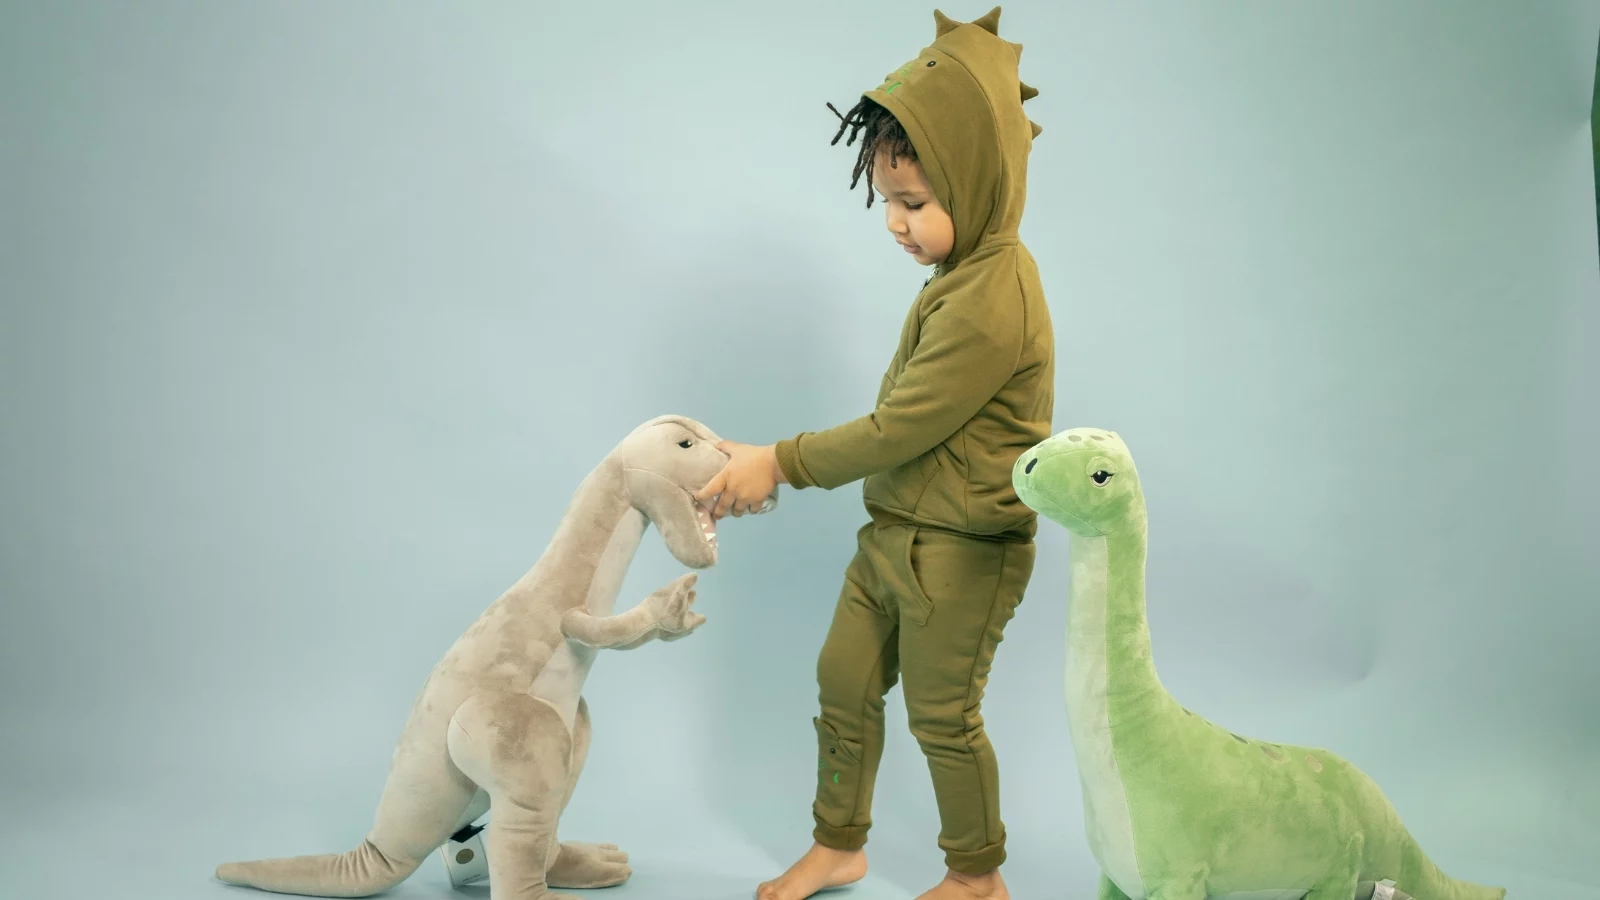 A kid dressed as dinasaur playing with toys.